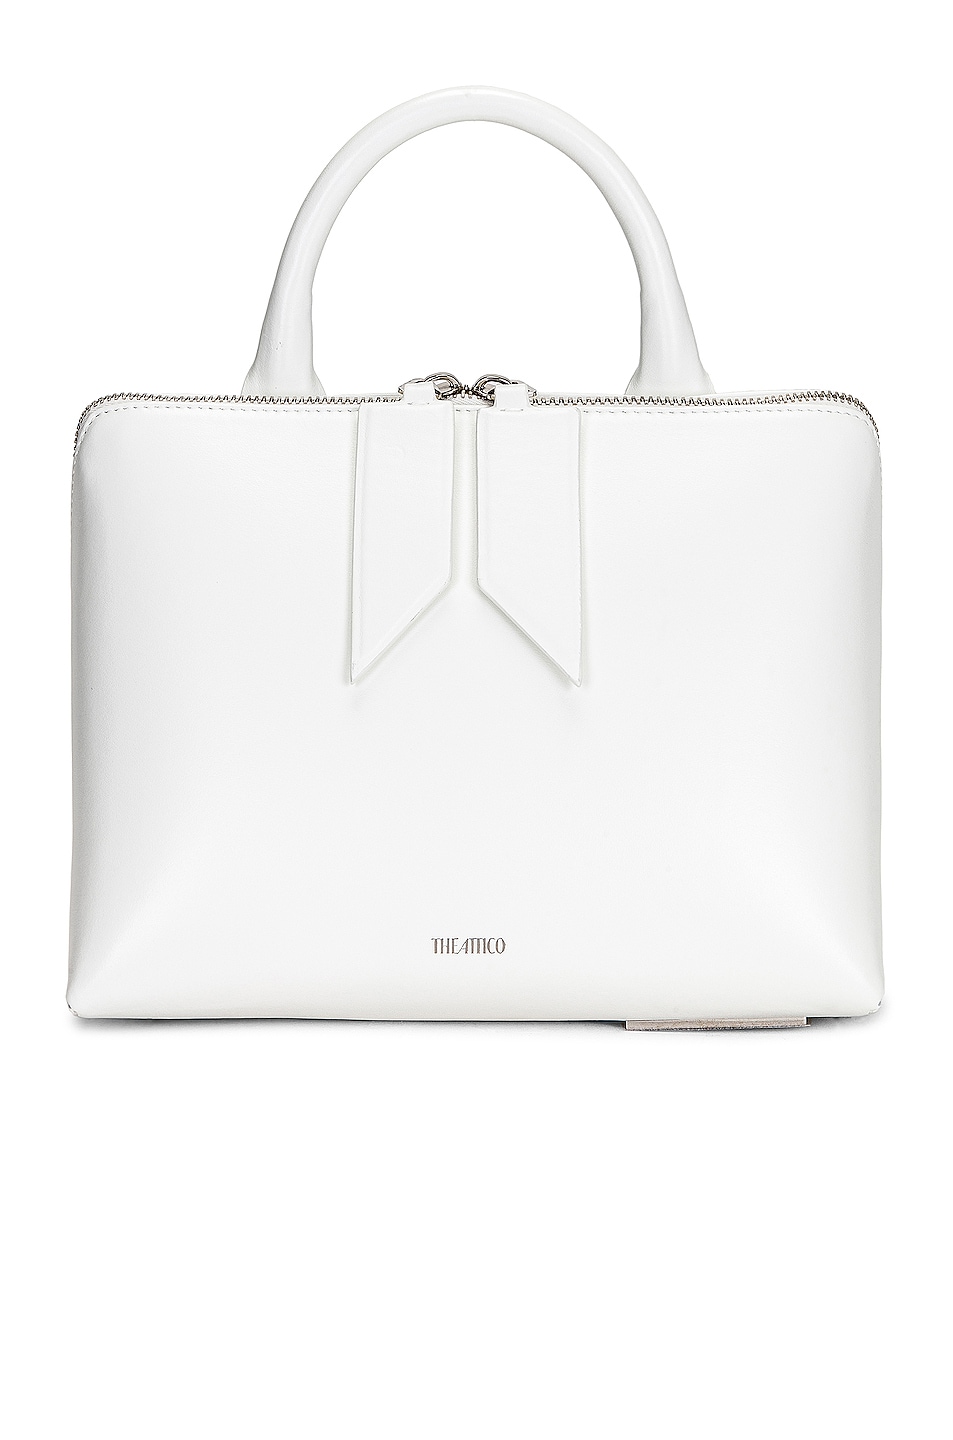 Monday Top Handle Bag in White